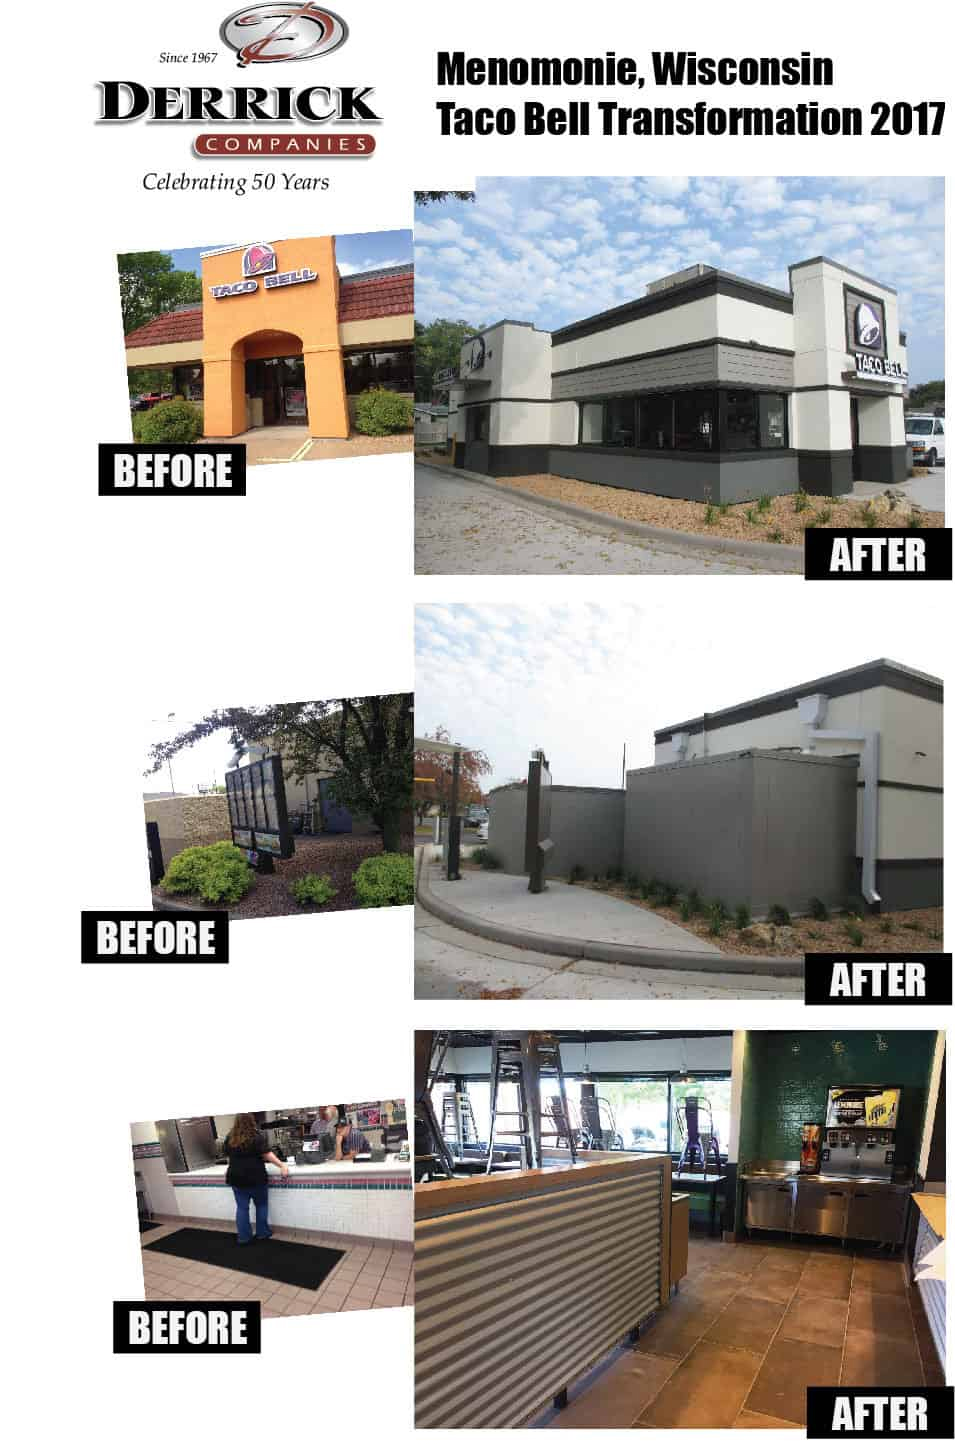 Before and after commercial improvements made to a Taco Bell restaurant.